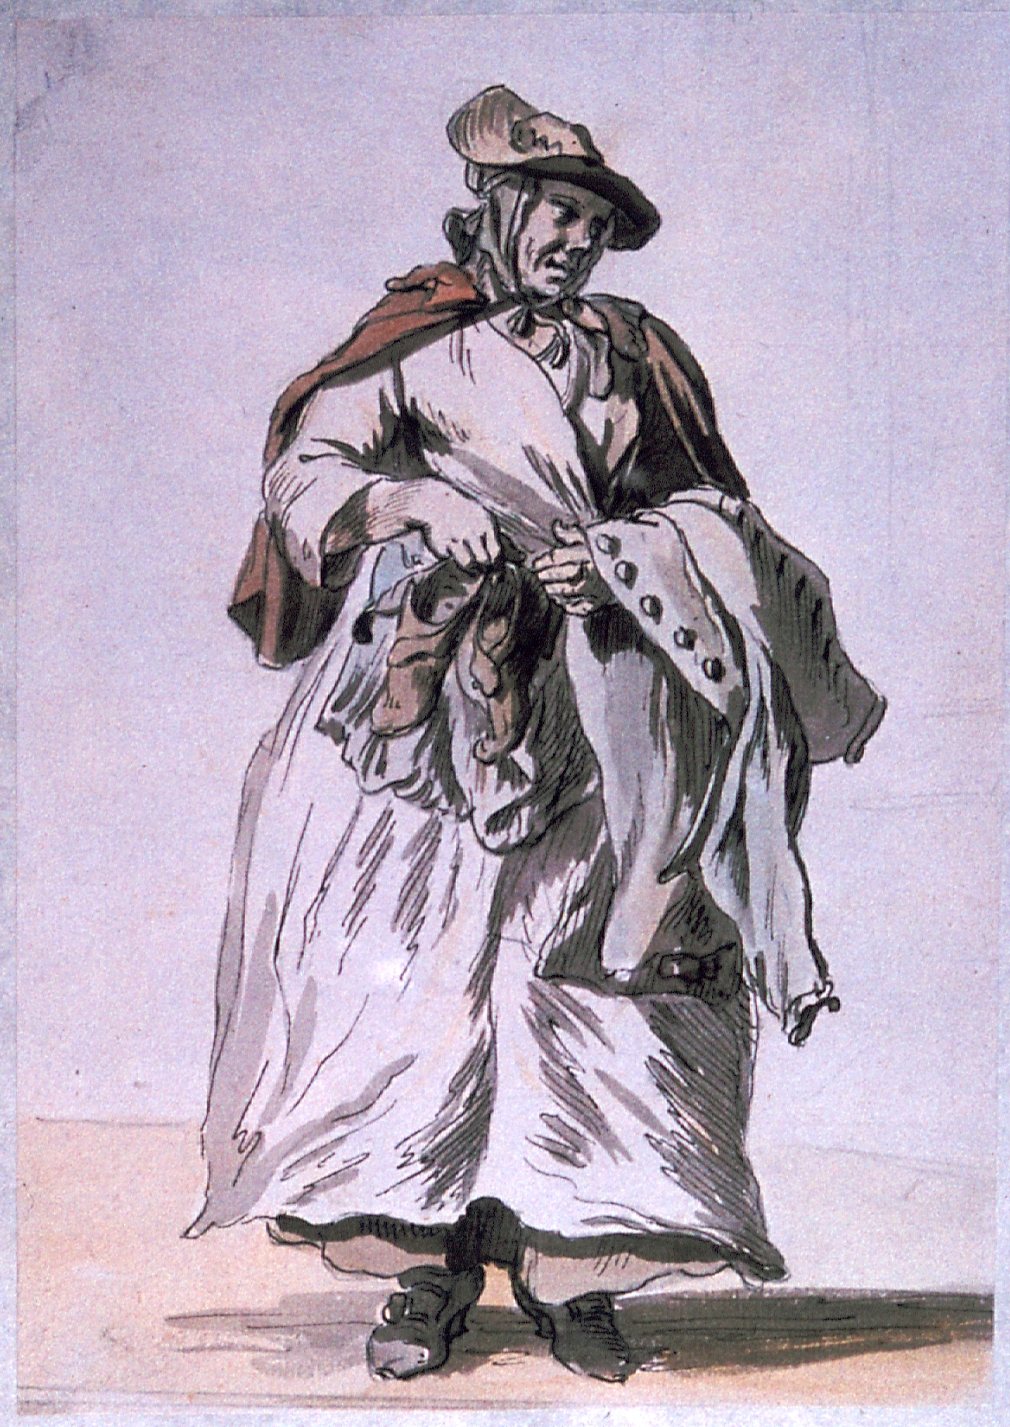 An older woman with a pair of shoes in one hand, and a man's jacket over one arm